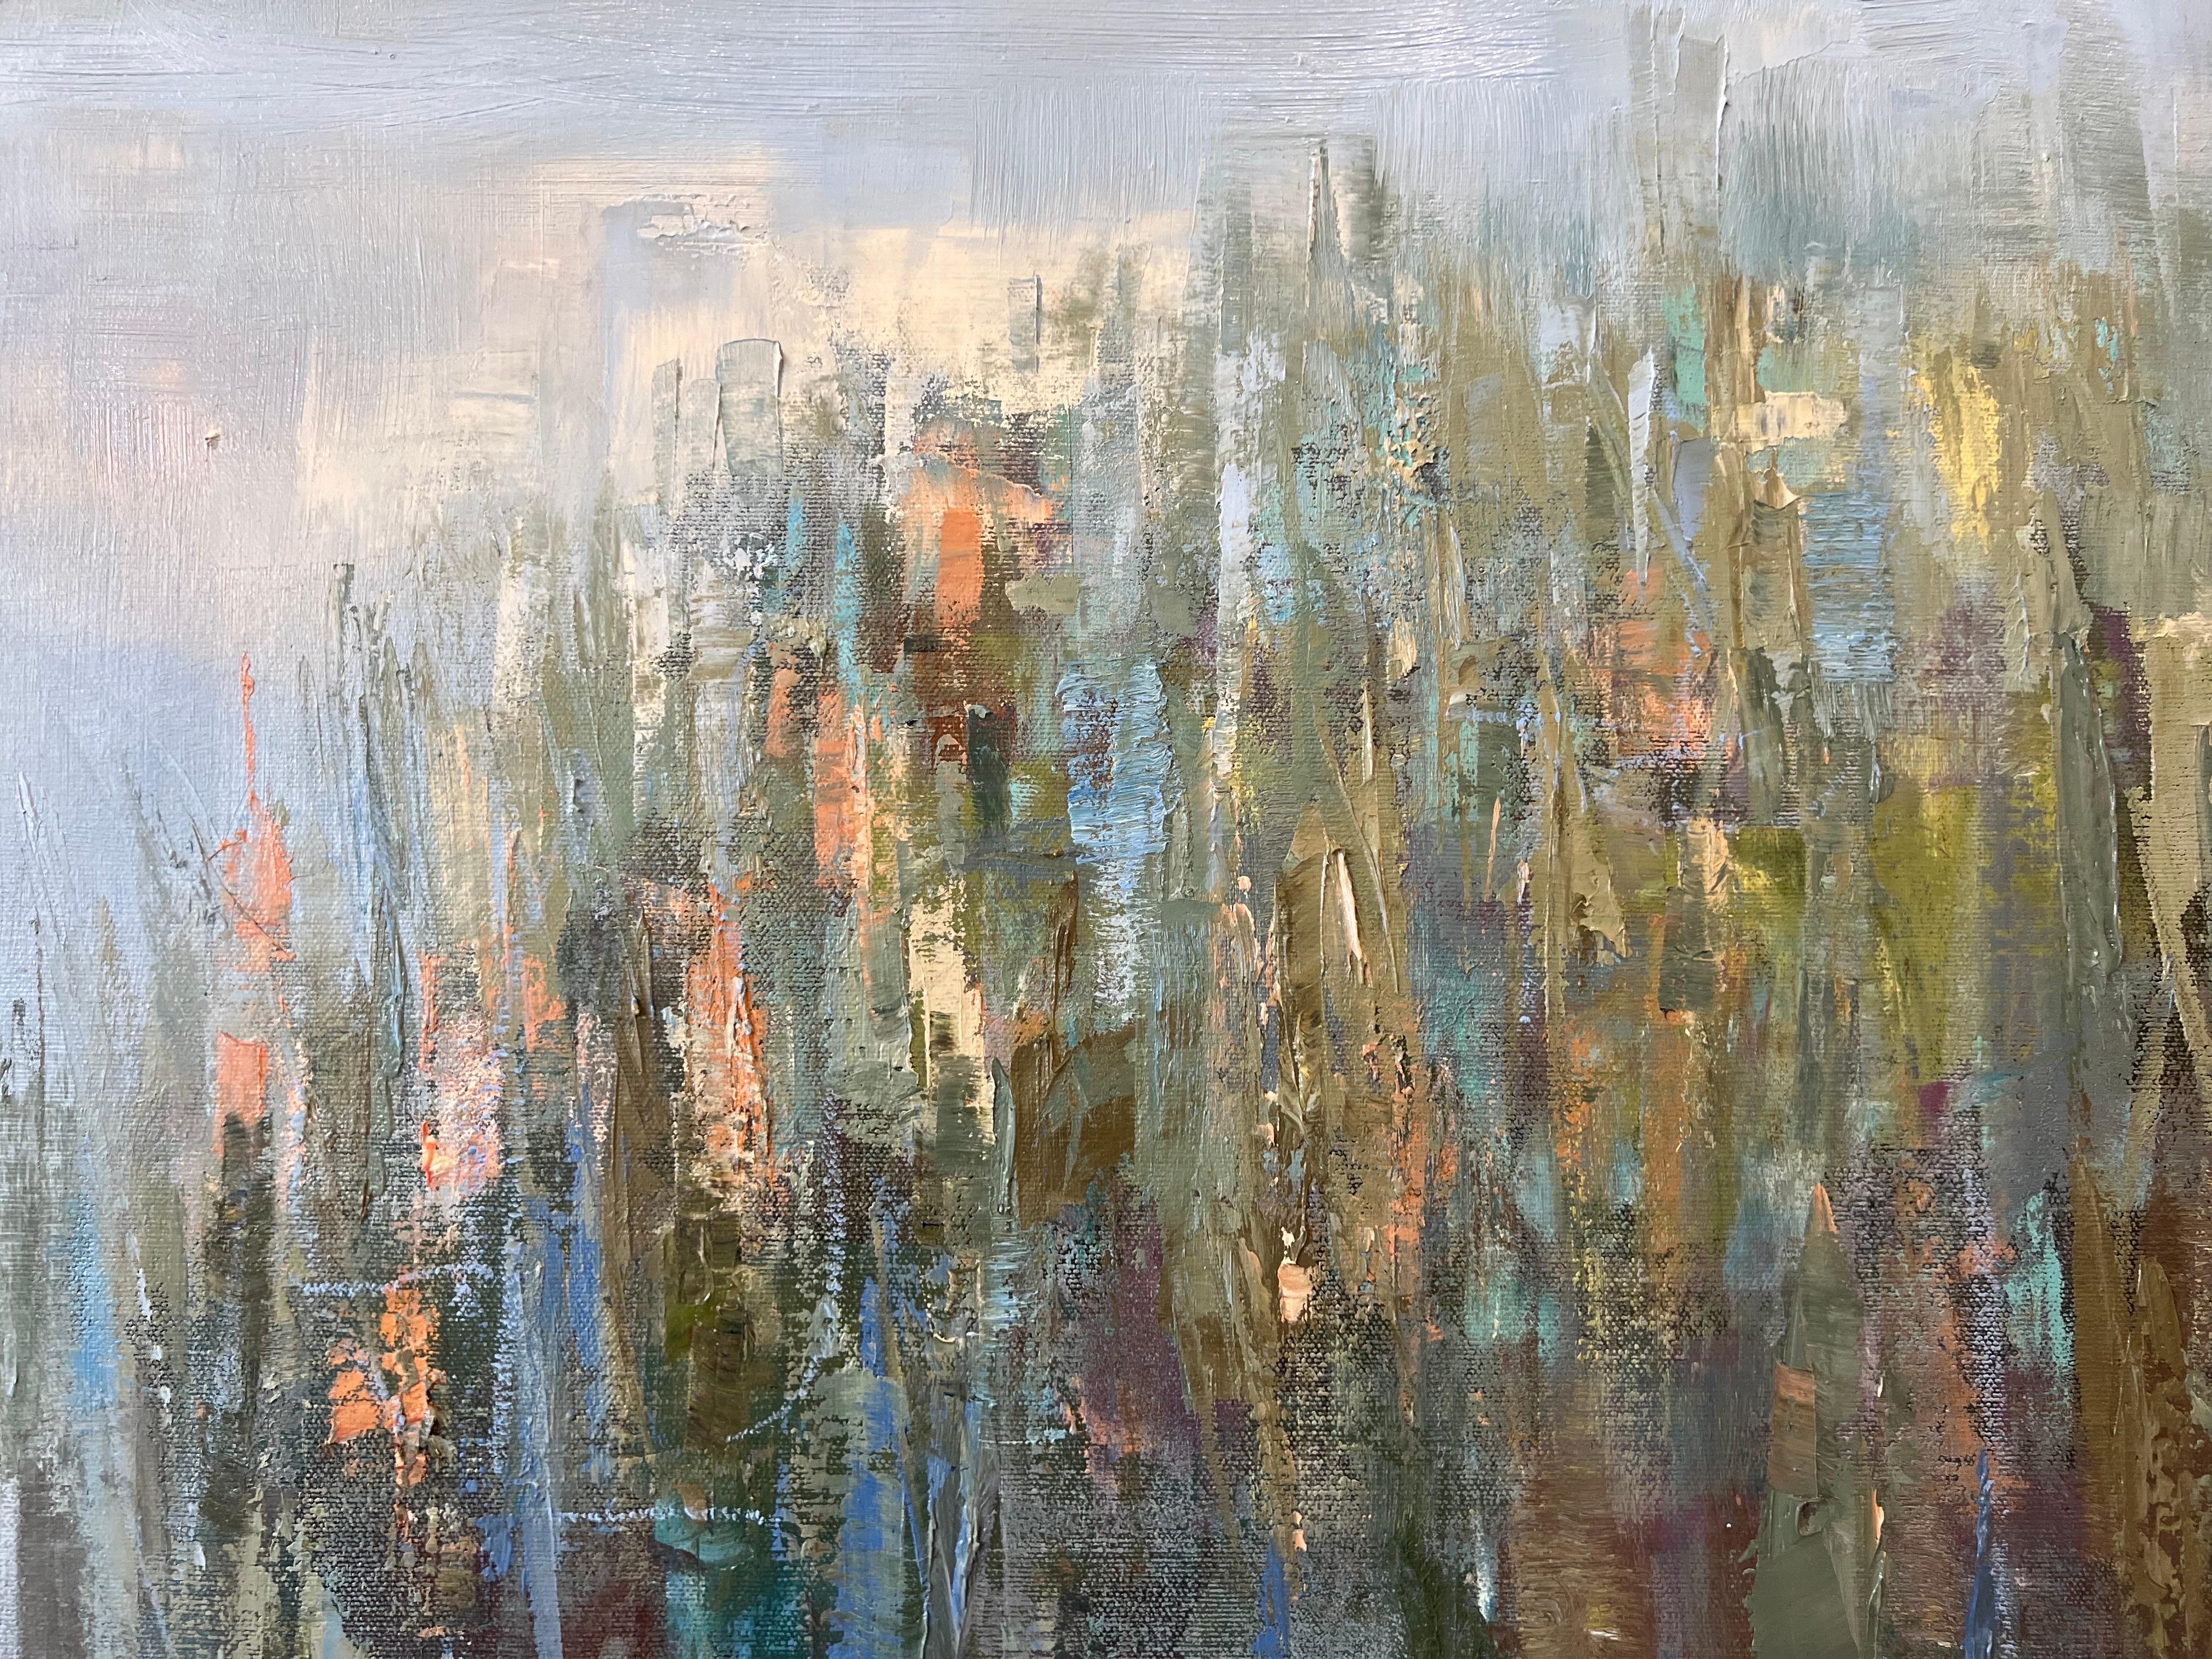 Mac's Moment by Allison Chambers, Oil on Canvas Abstract Landscape Painting 5